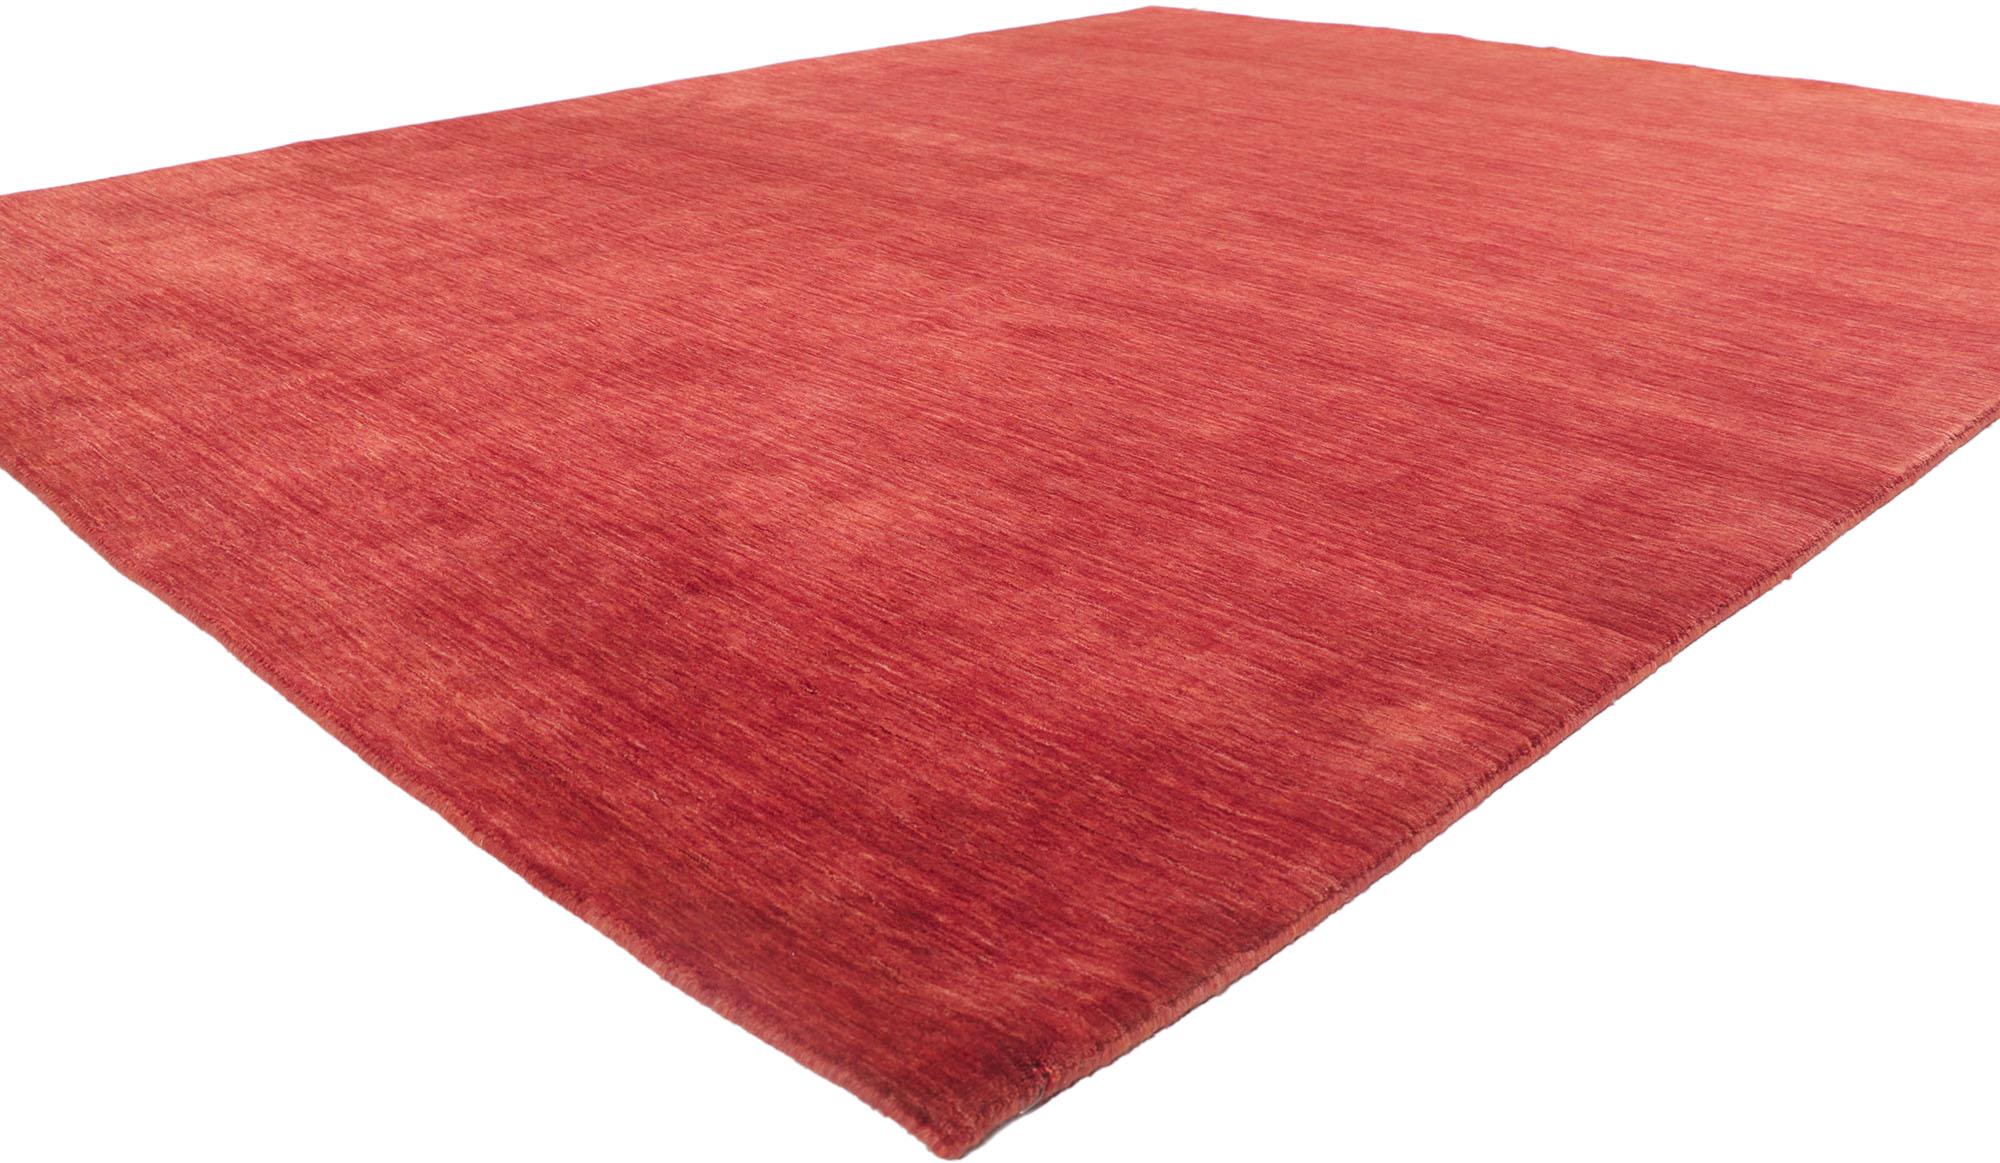 30731 New Contemporary Red Area rug with Modern Style 08'02 x 10'00. Effortless, elegant, and casual meets the eye in this contemporary Indian area rug. It features gorgeous red hues and softly gradated striations running selvage to selvage blending